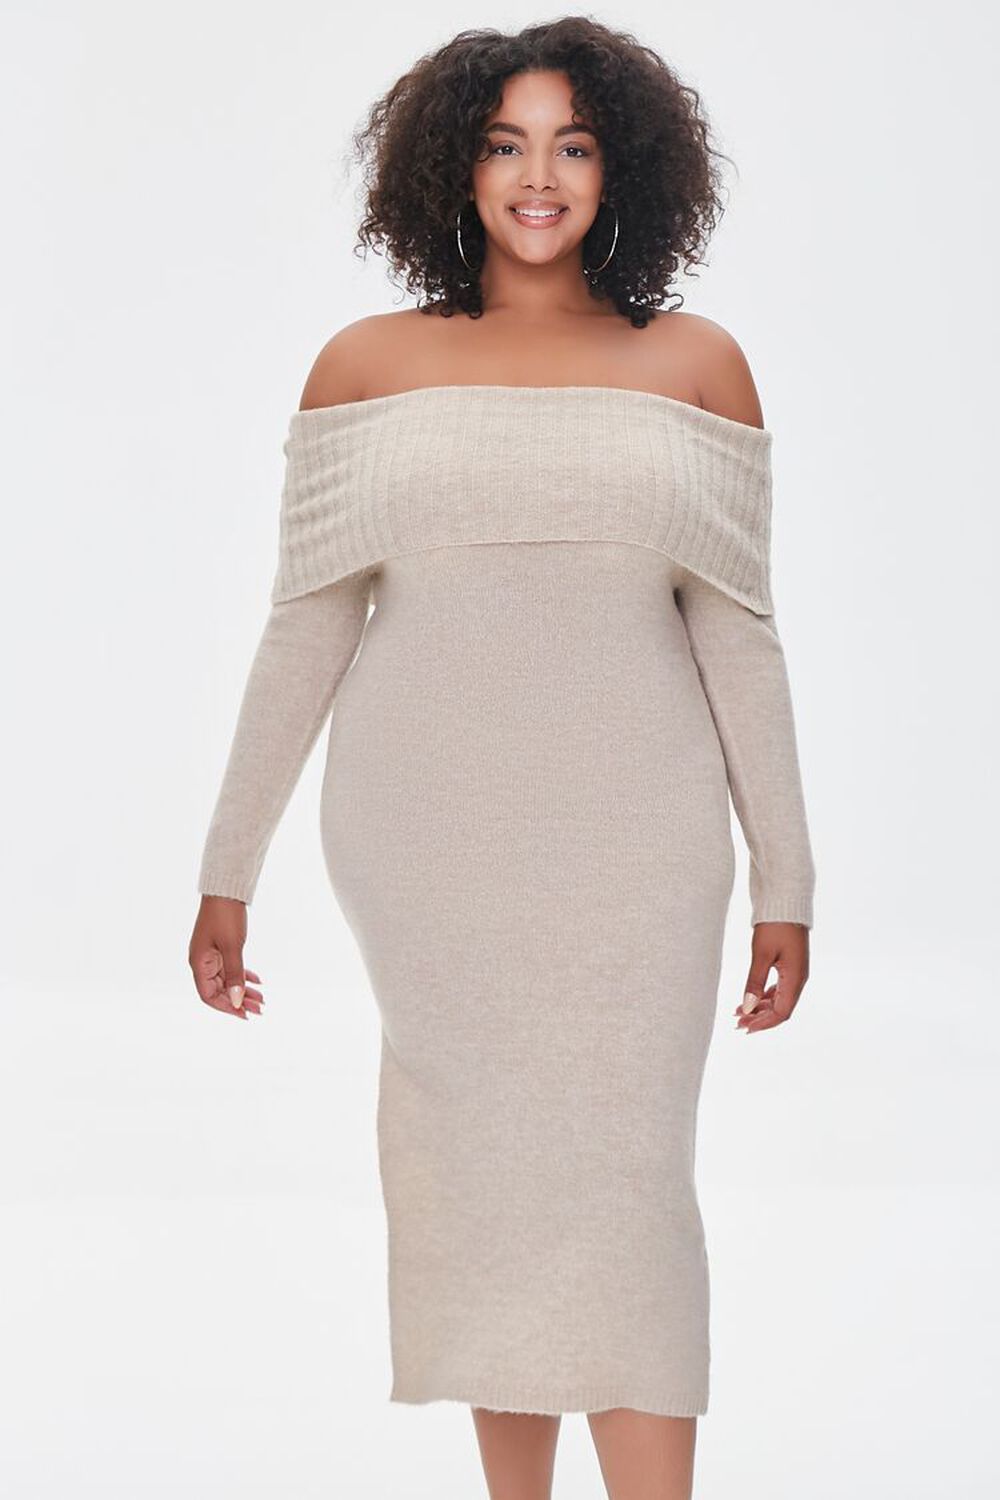 OATMEAL Plus Size Off-the-Shoulder Sweater Dress, image 1